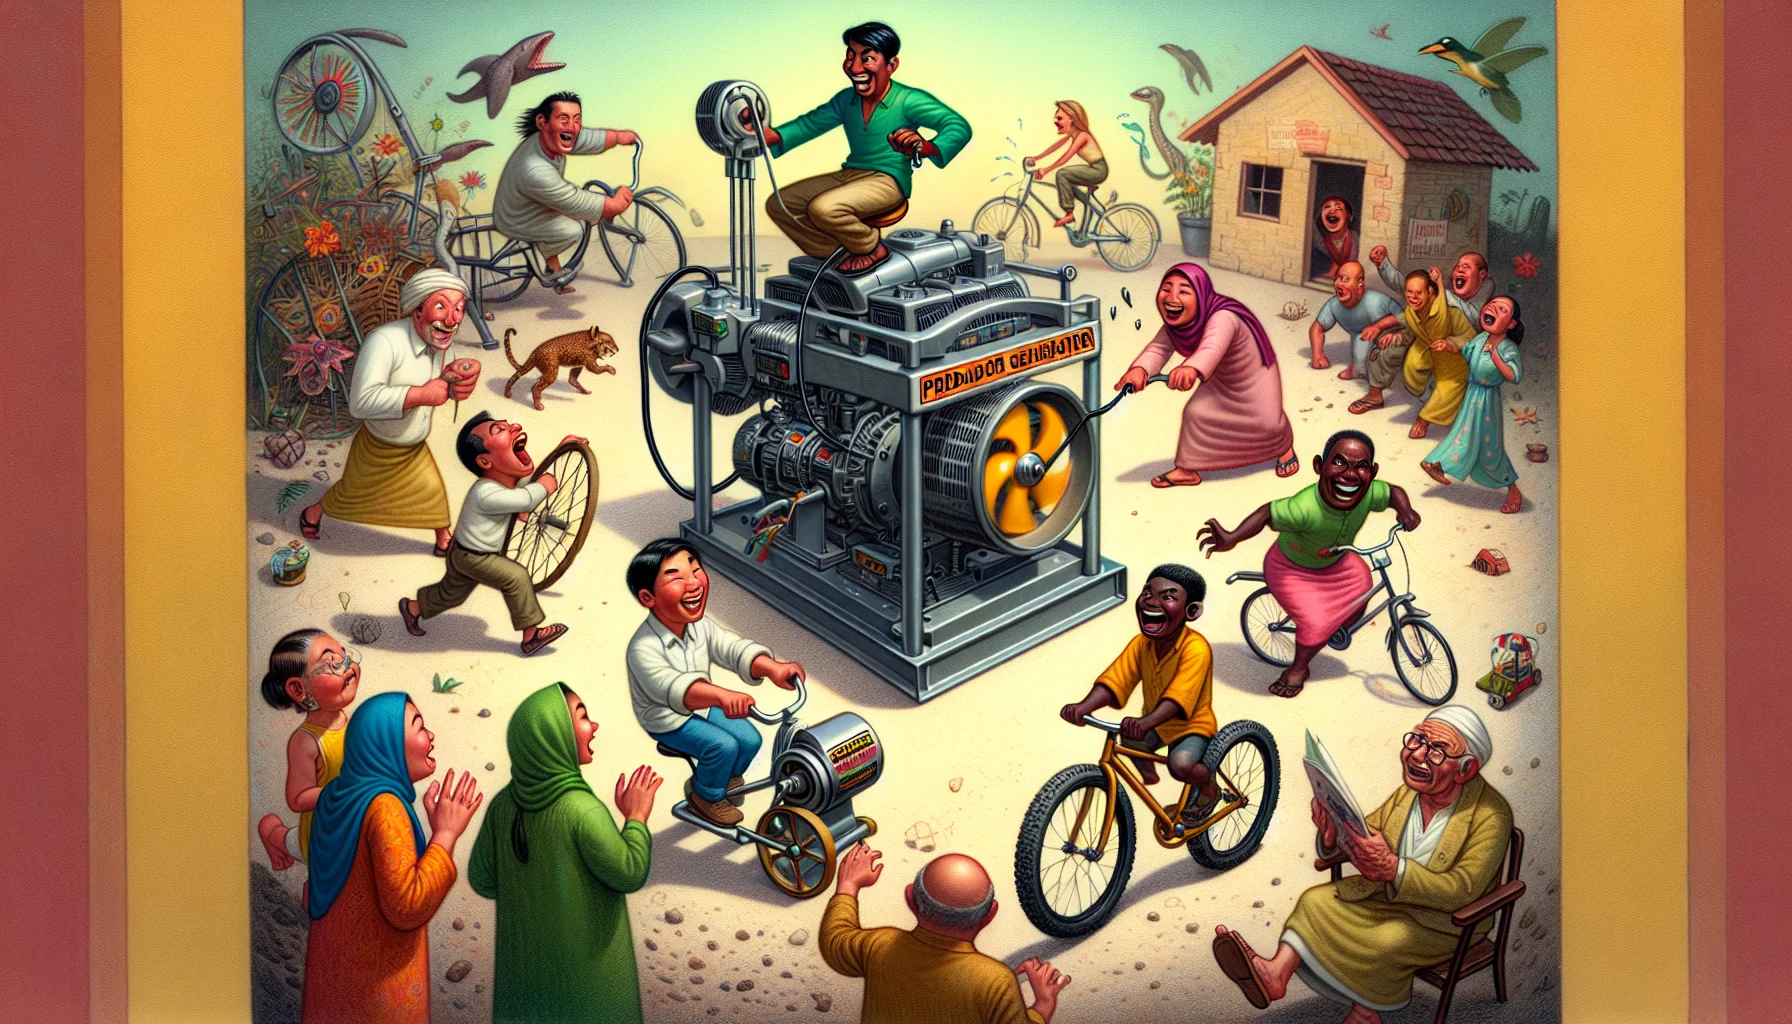 Illustrate a humorous situation of a realistically designed Predator Generator's filter, located prominently in the scene. It is attracting attention from a diverse group of people who show wonder and excitement at the prospect of generating electricity. Picture an East Asian man hilariously biking to power the generator, a Black woman laughing while turning a giant manual crank, a South Asian boy attempting to run on a wheel like a hamster, and a Middle Eastern elderly woman bemusedly watching the scene unfold, all encircling the central generator filter.